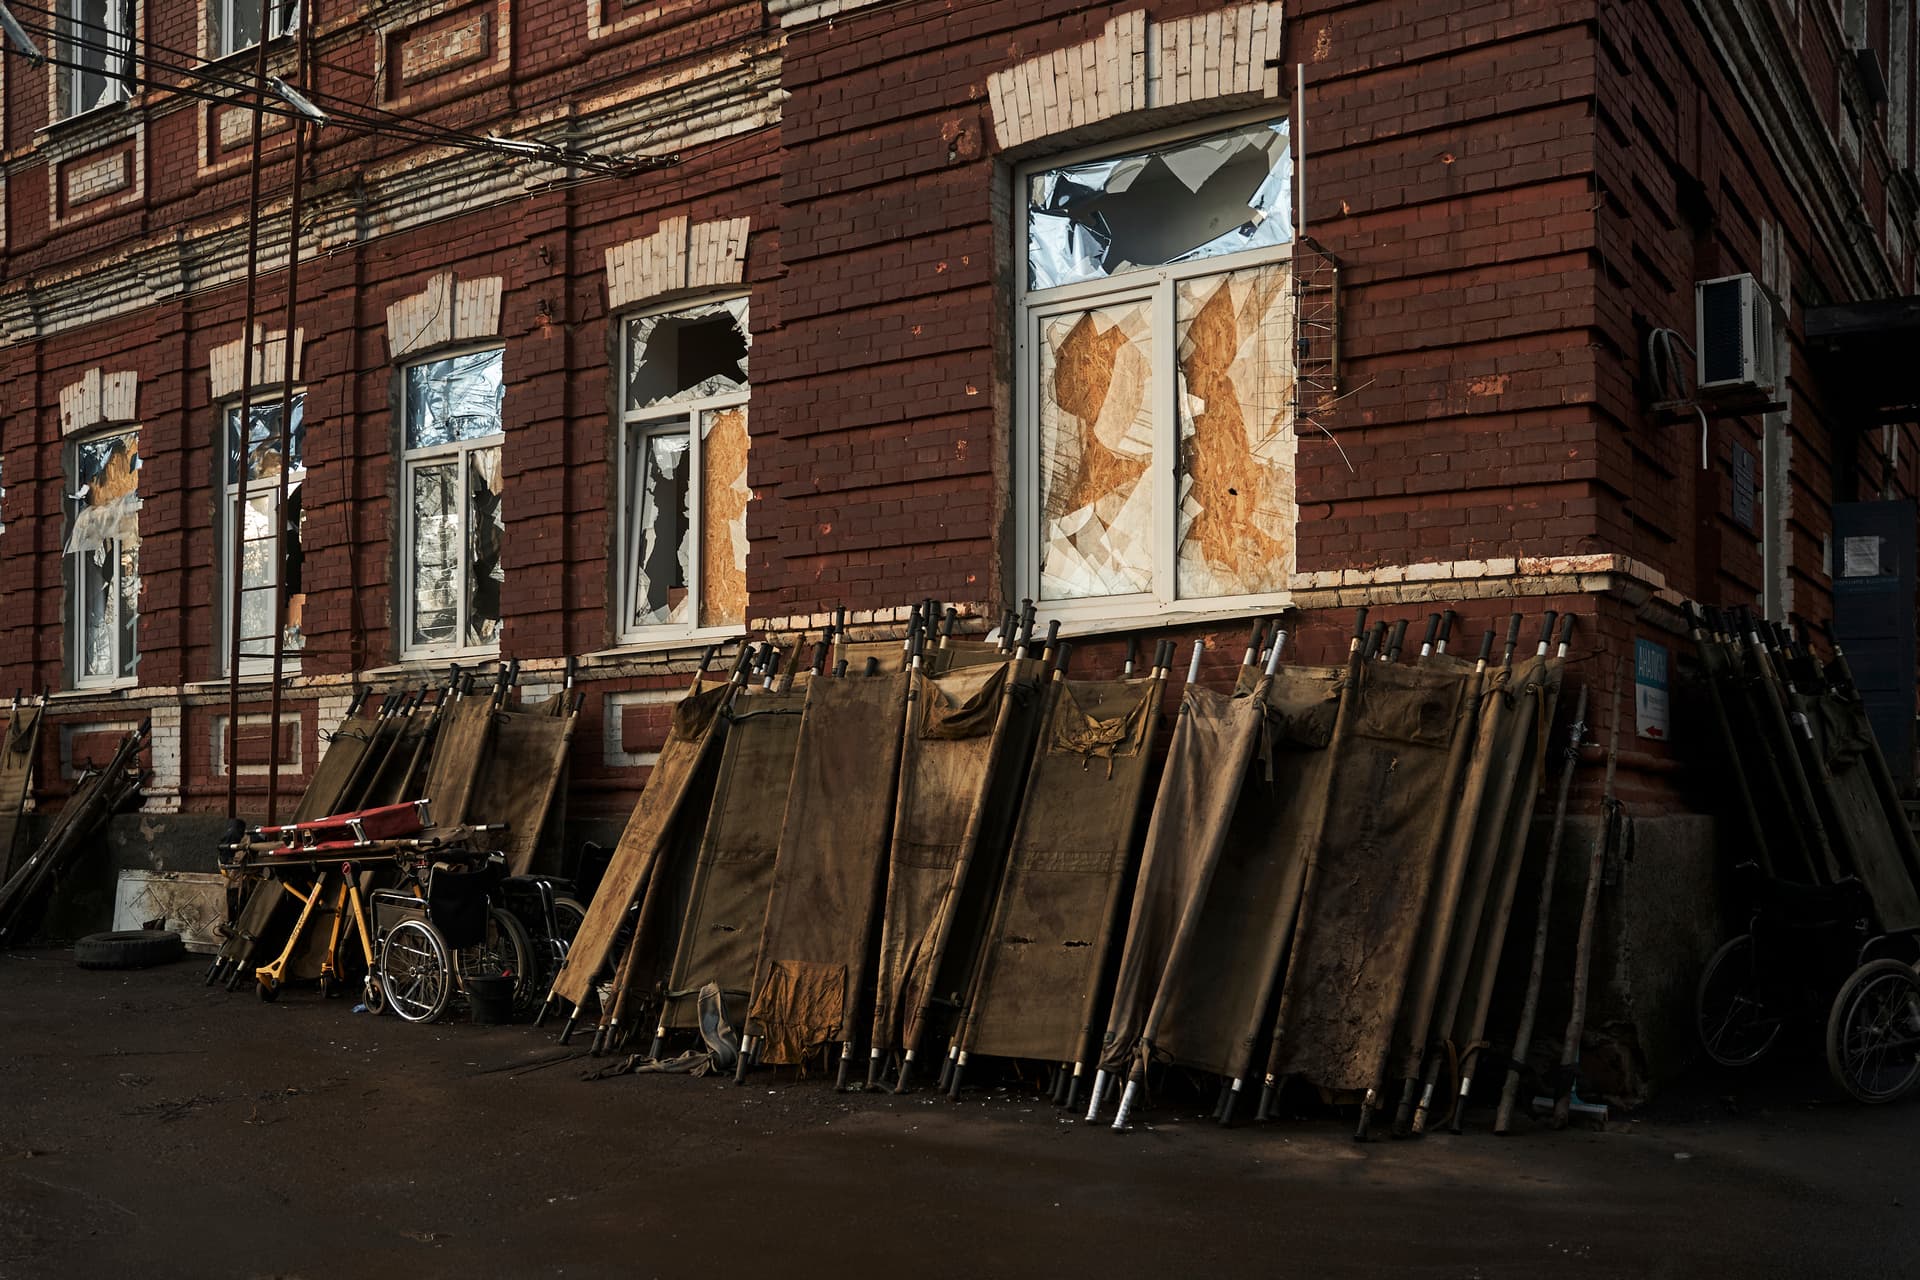 Stretchers are seen outside a city hospital, where wounded Ukrainian soldiers are brought for treatment, in Bakhmut